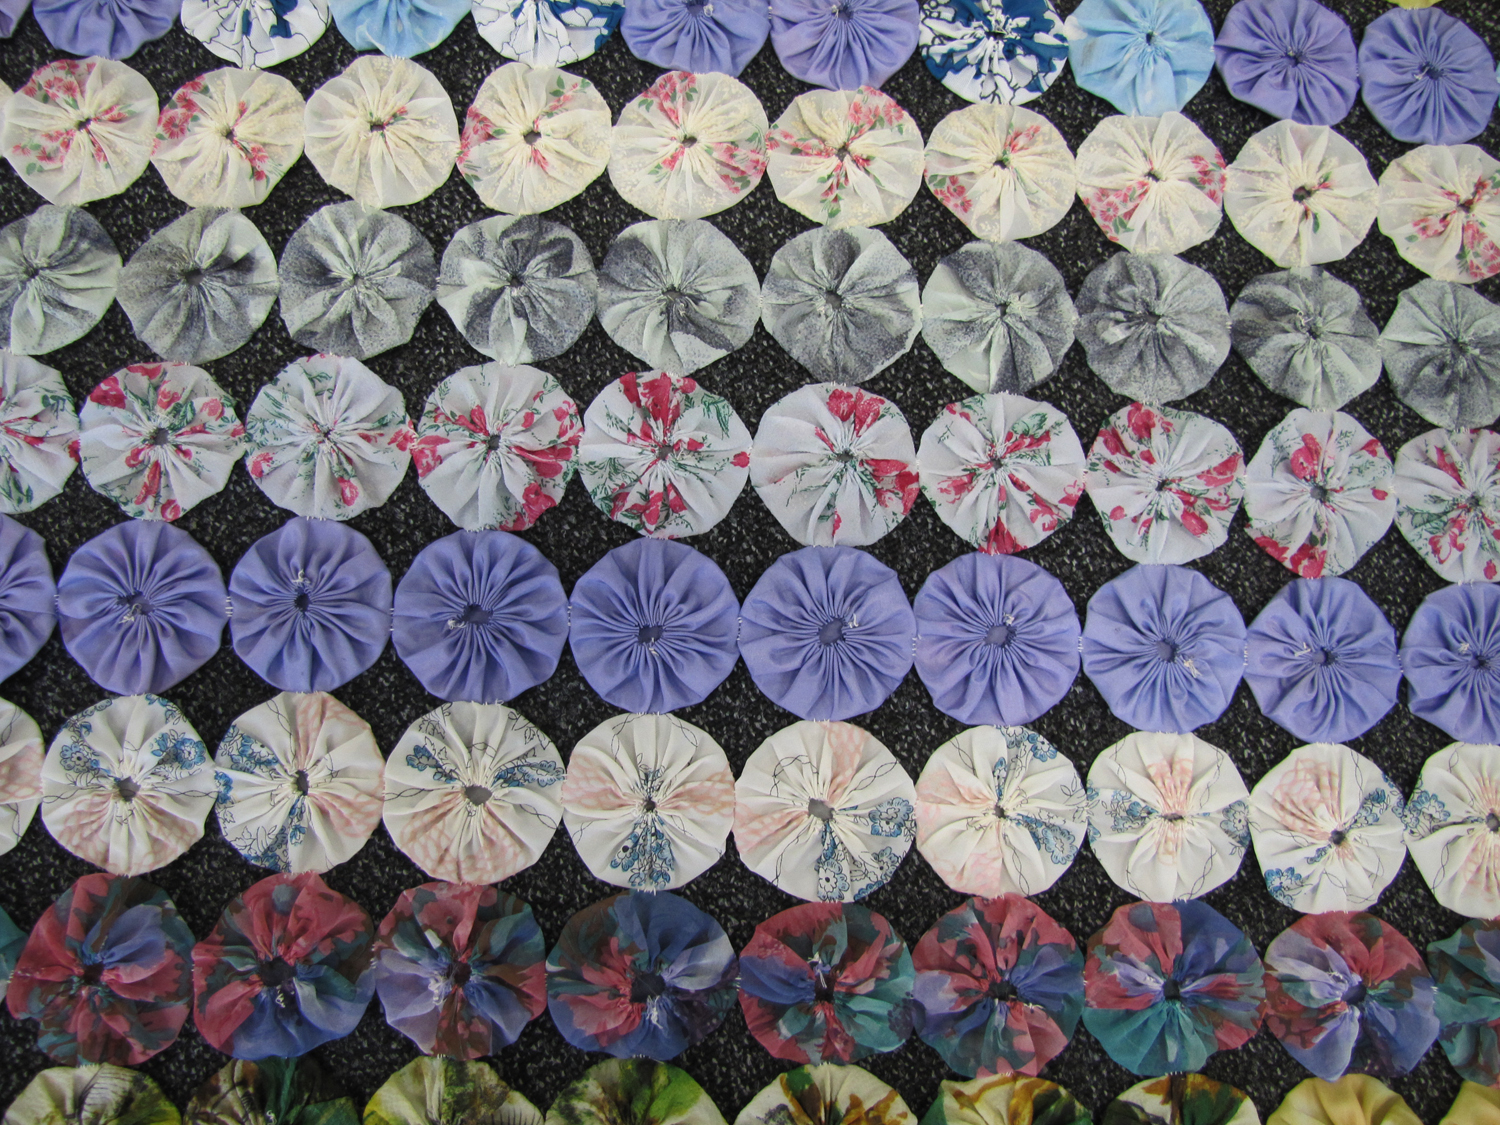 Photographs of quilt made from fabric circles - Open Access Repository